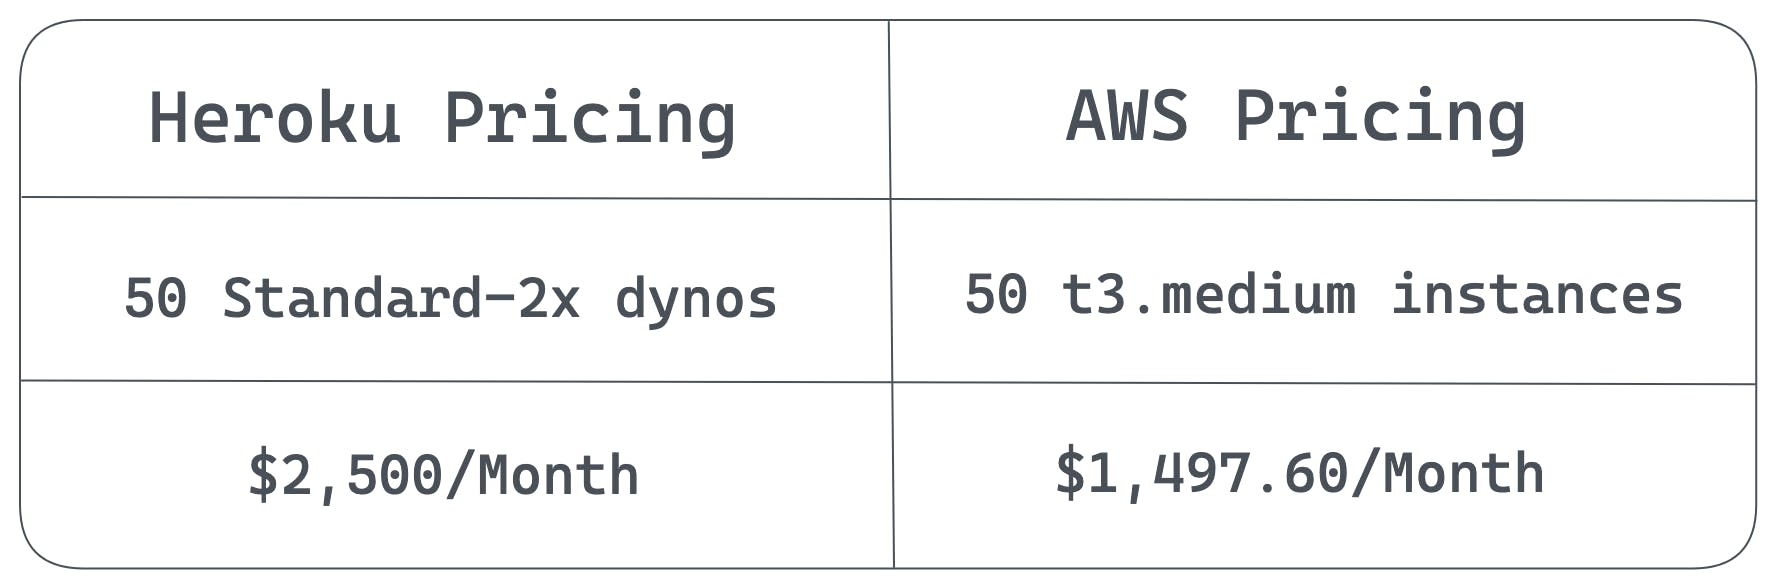 Heroku Vs. AWS pricing, based on equivalent instances, for a montly cost